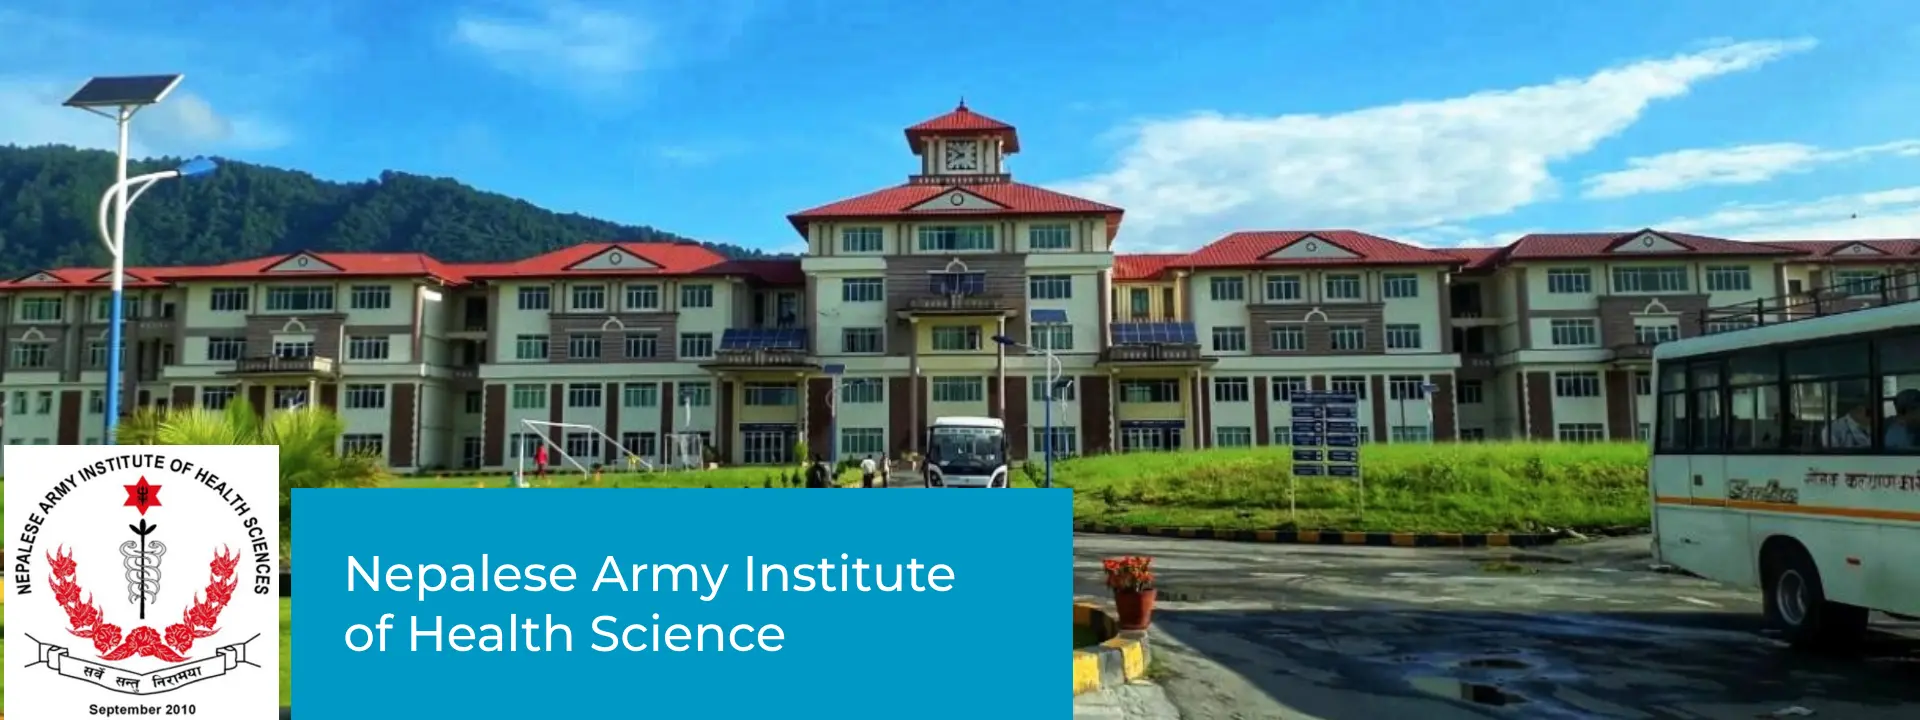 Nepalese Army Institute of Health Science